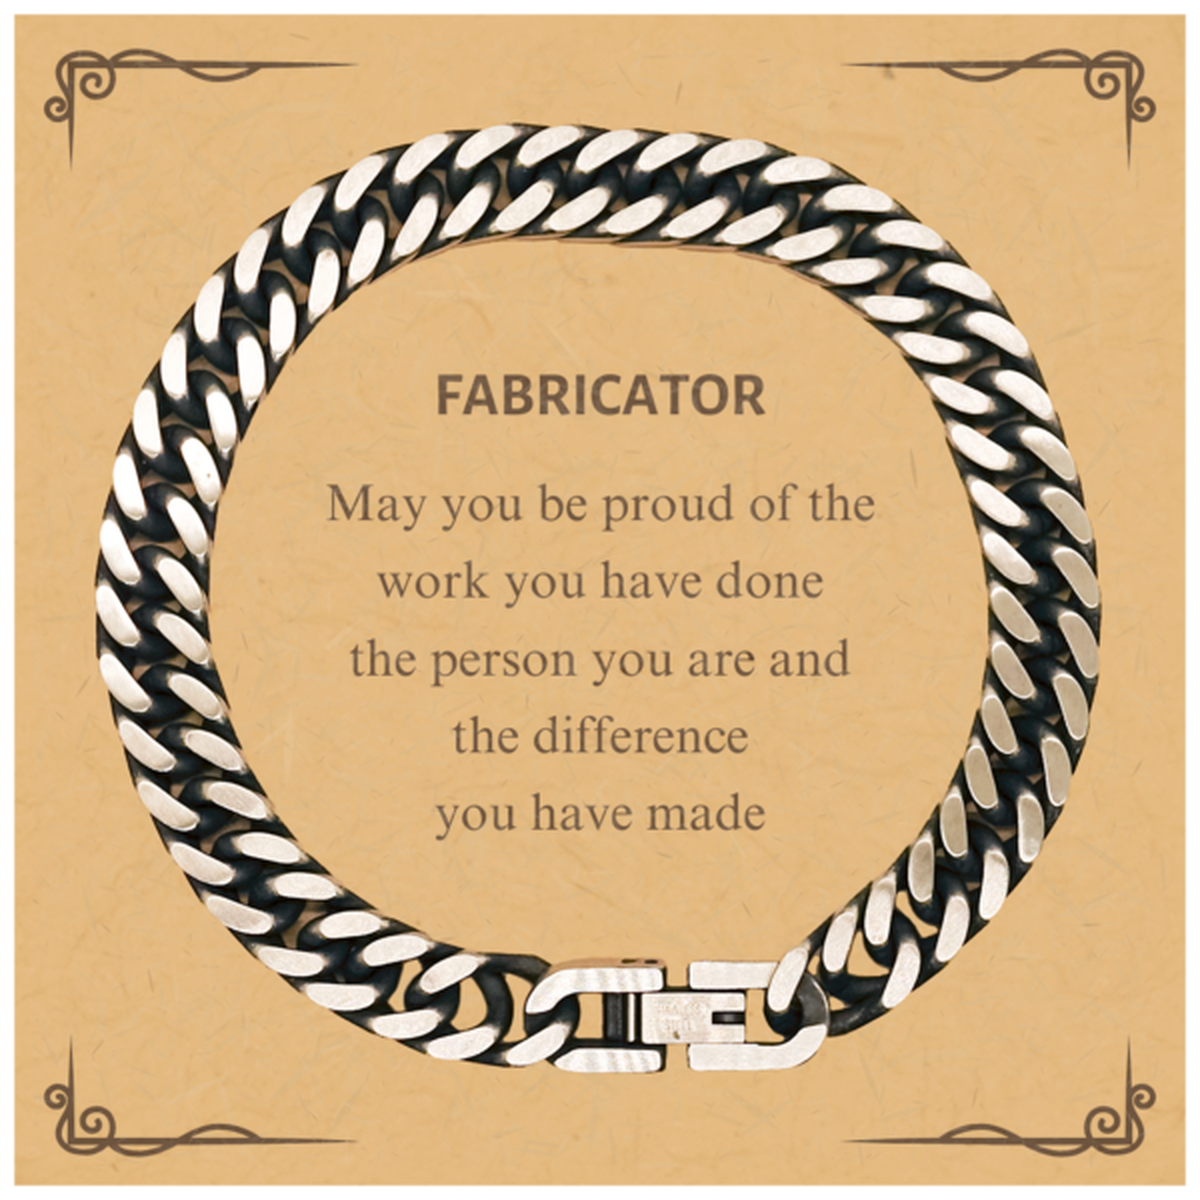 Fabricator May you be proud of the work you have done, Retirement Fabricator Cuban Link Chain Bracelet for Colleague Appreciation Gifts Amazing for Fabricator